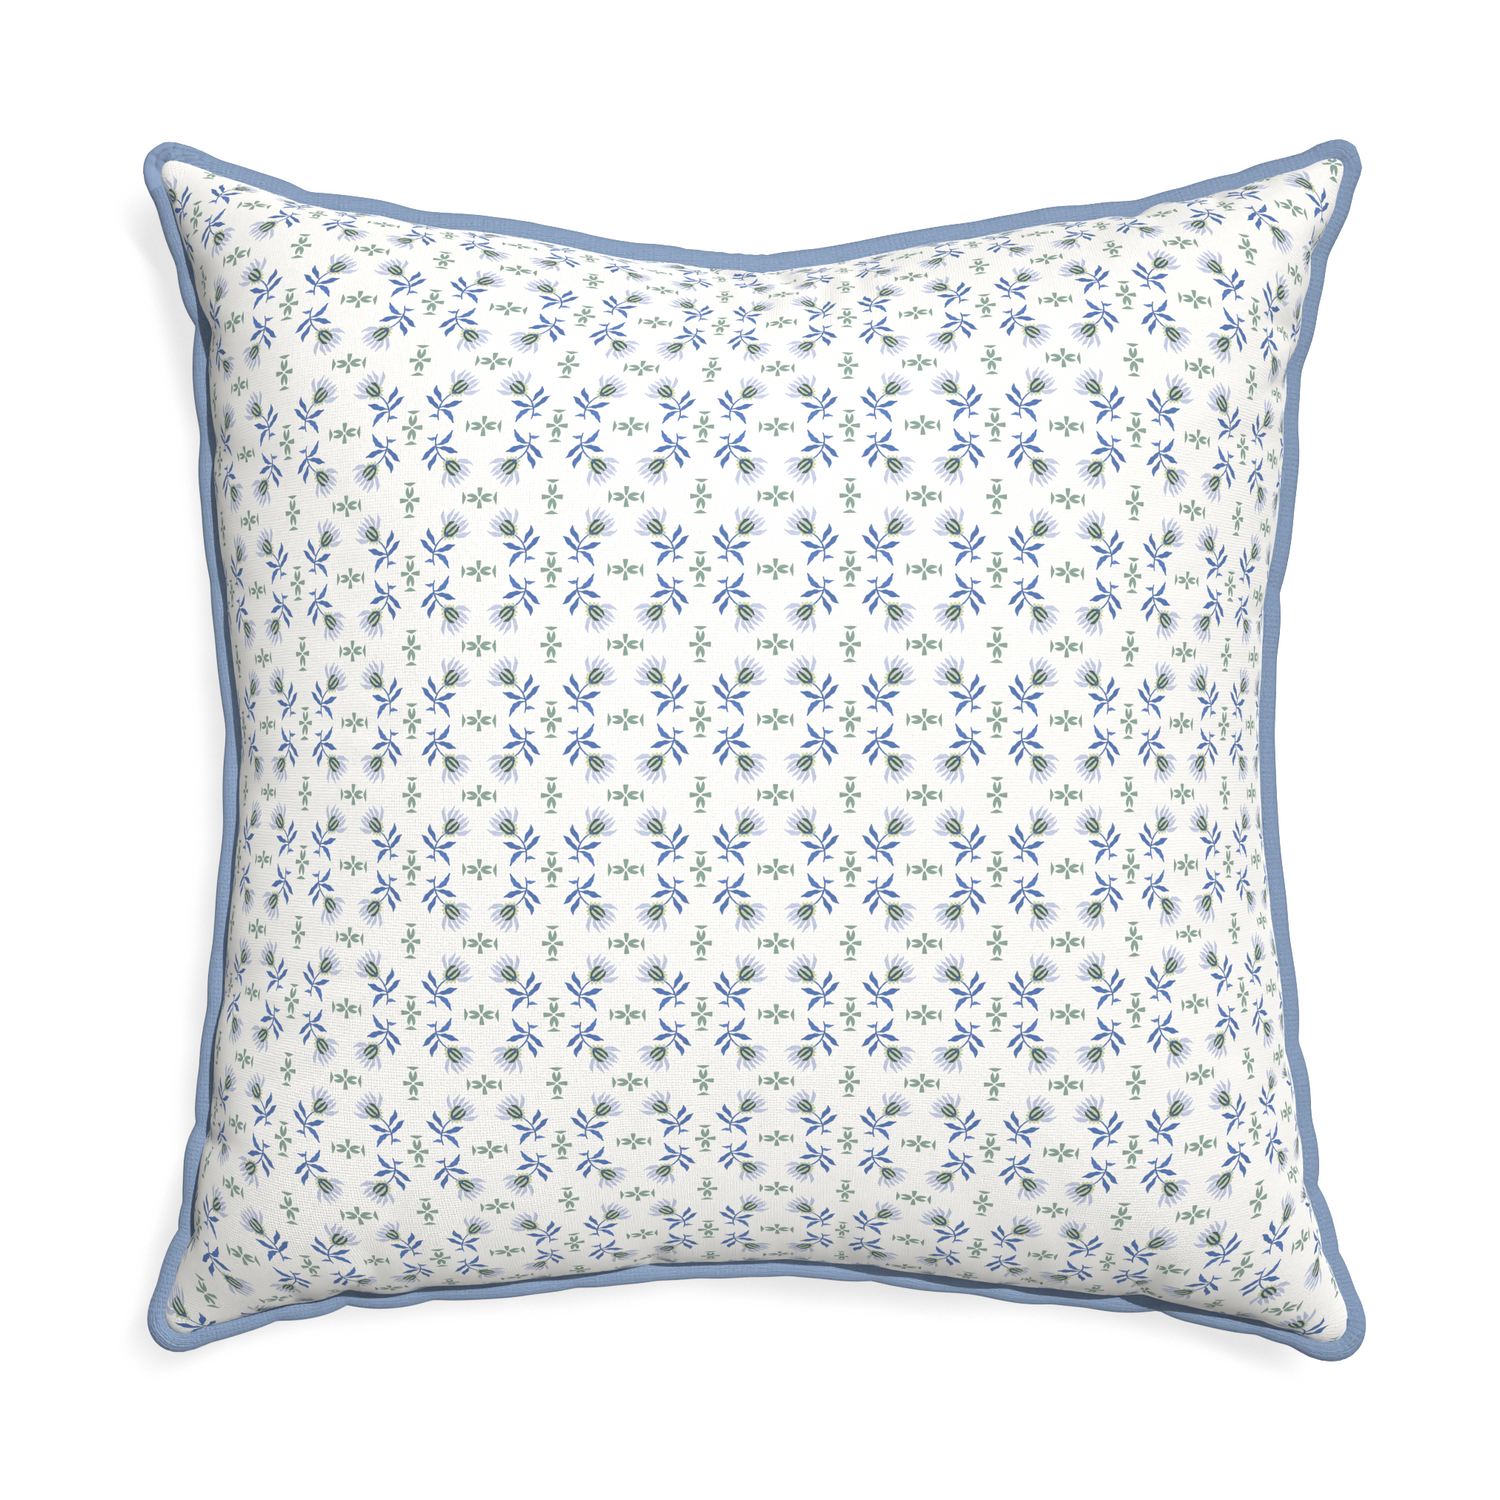 Euro-sham lee custom blue & green floralpillow with sky piping on white background